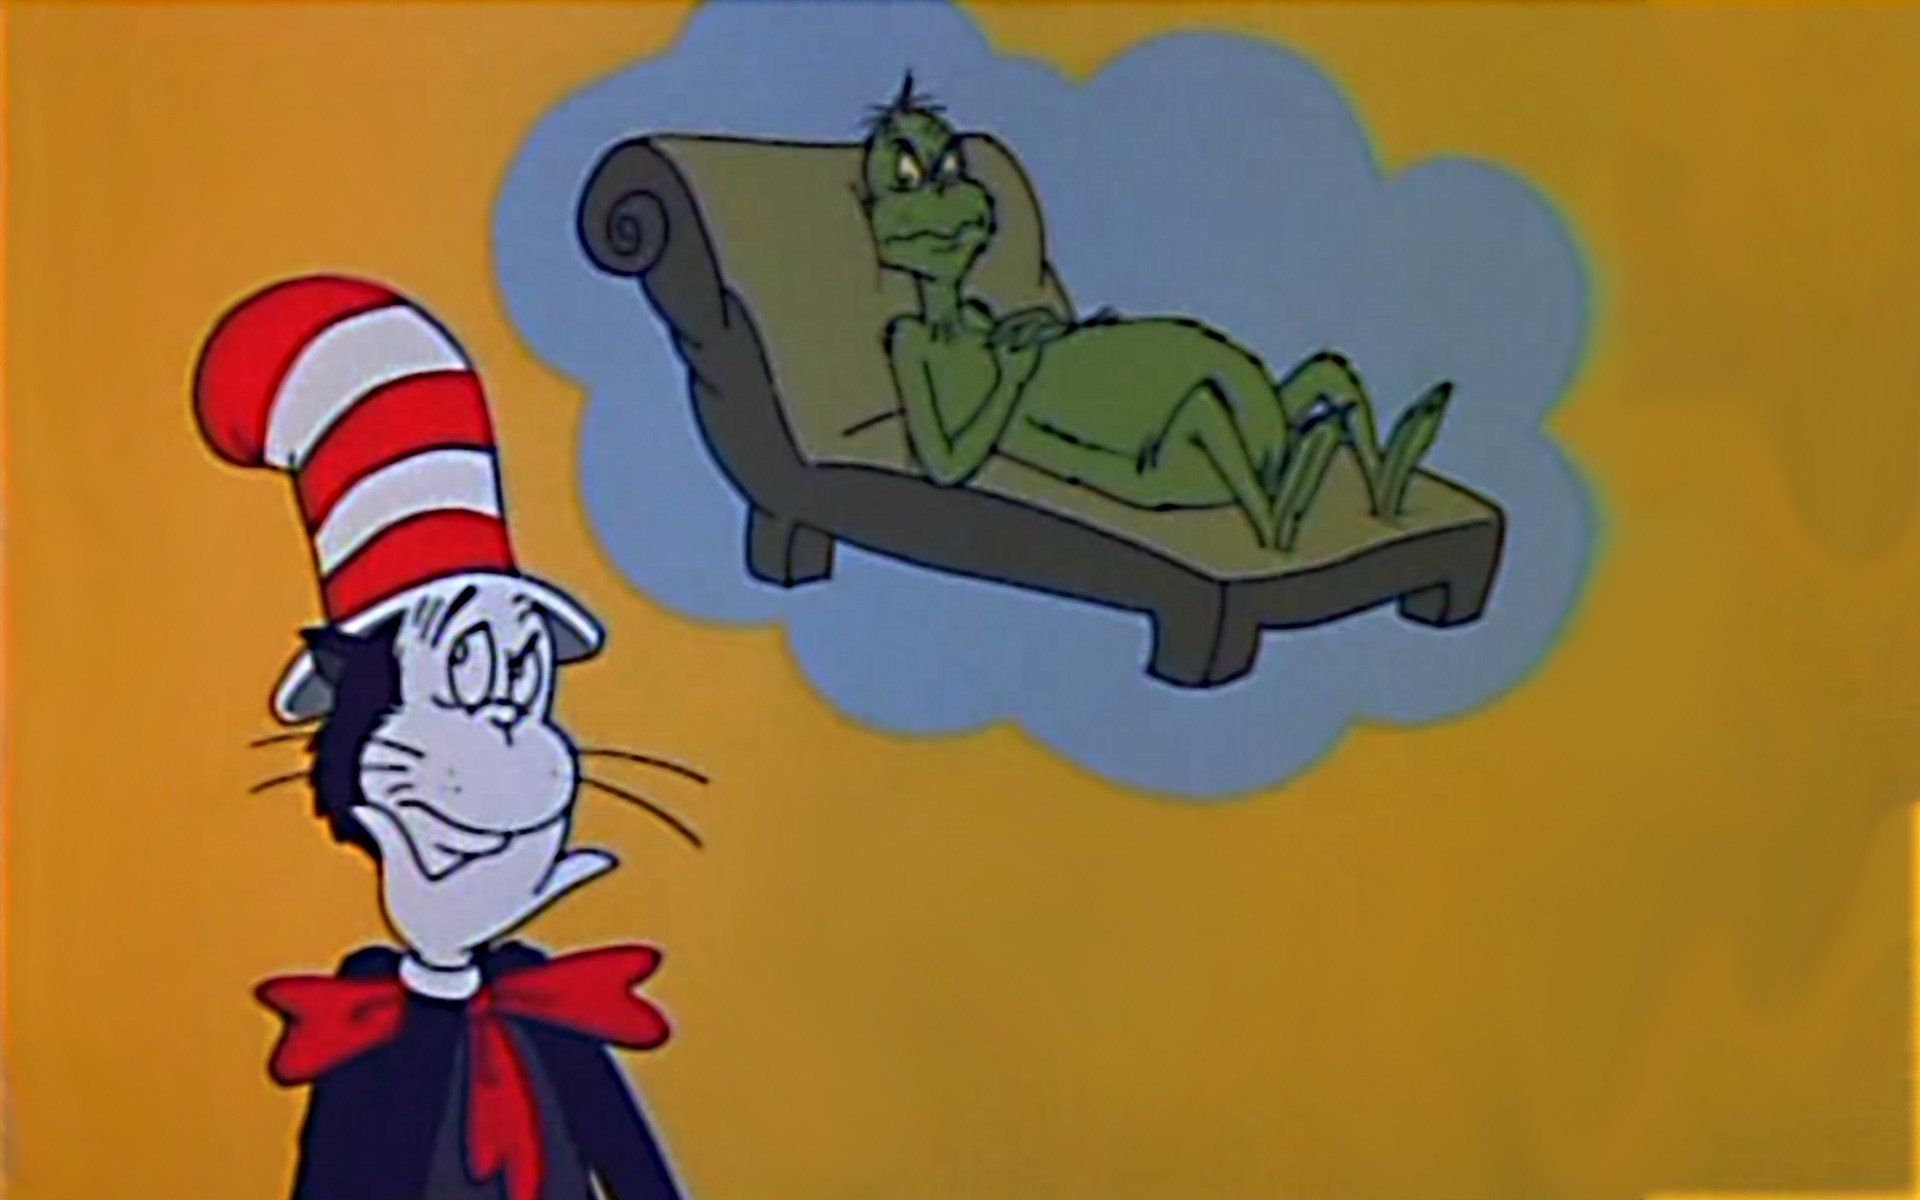 The Grinch Grinches The Cat In The Hat Where To Watch It